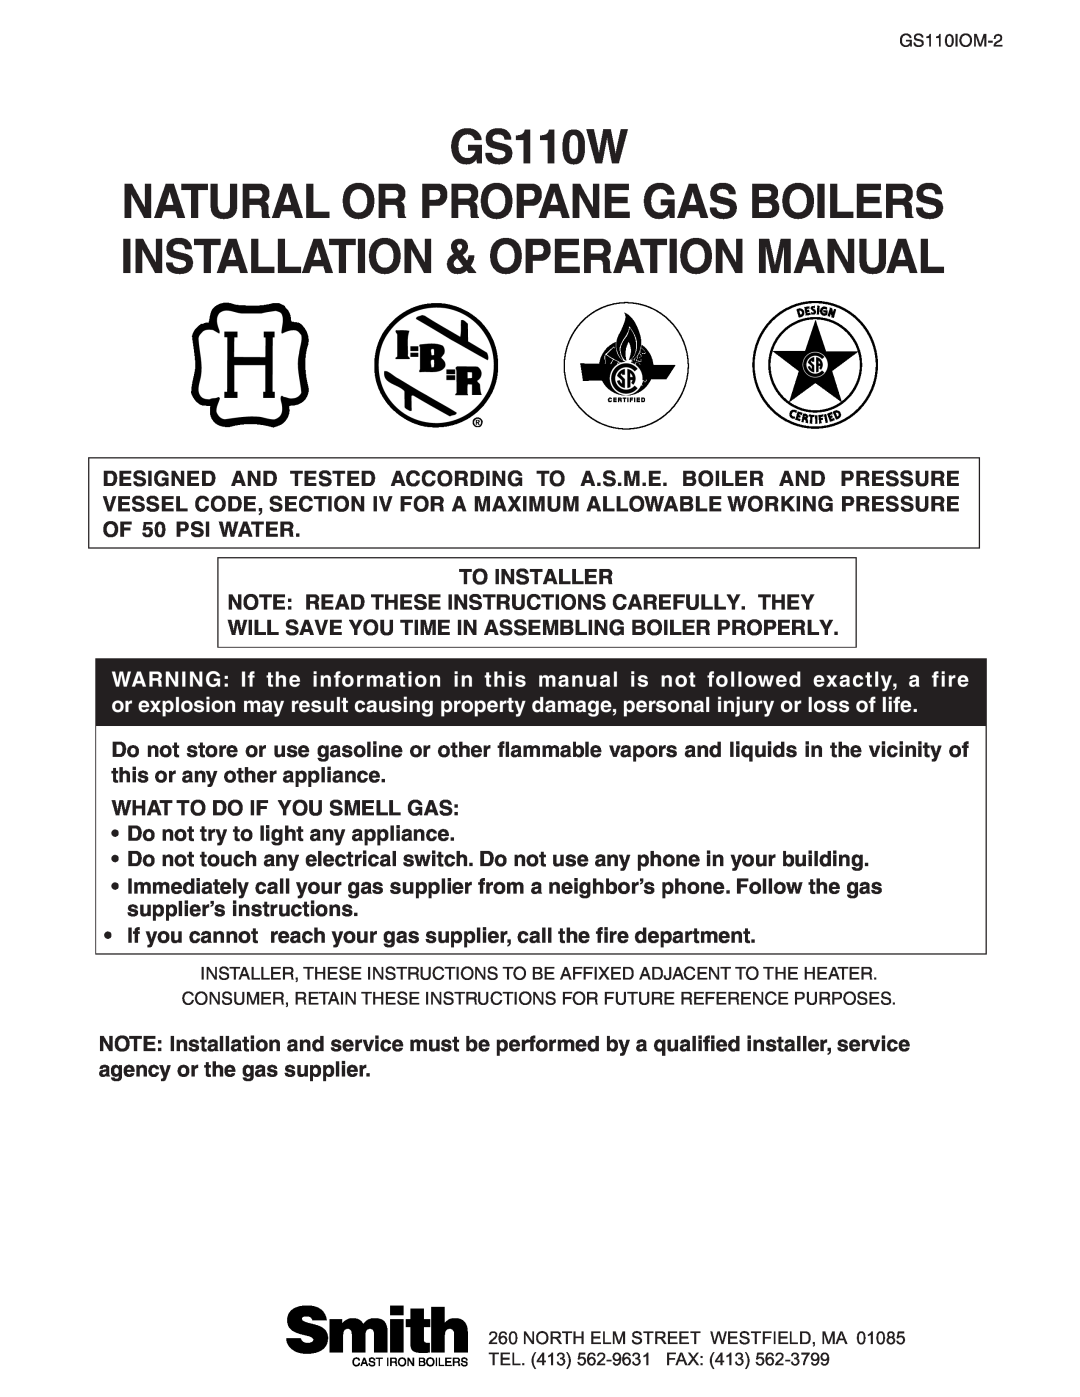 Smith Cast Iron Boilers GS110W operation manual 